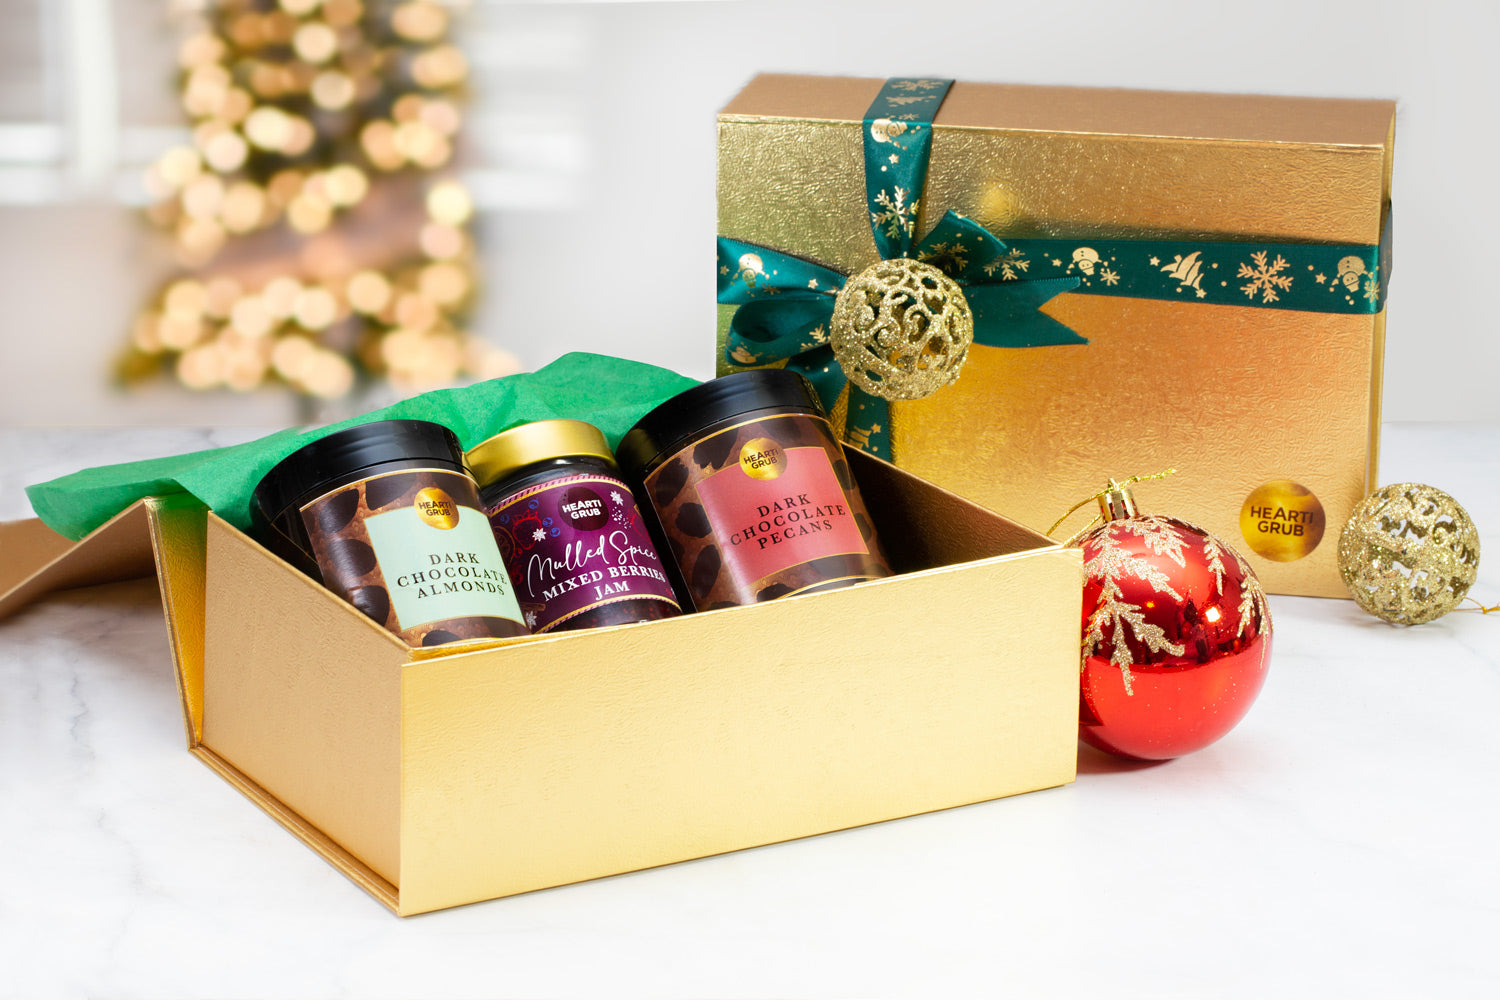 Chrsitmas Gifts. Holiday Gifts. Made in UAE. Gourmet Gifting. HeartiGrub. Nut Butters. Home Delivery. Jams.